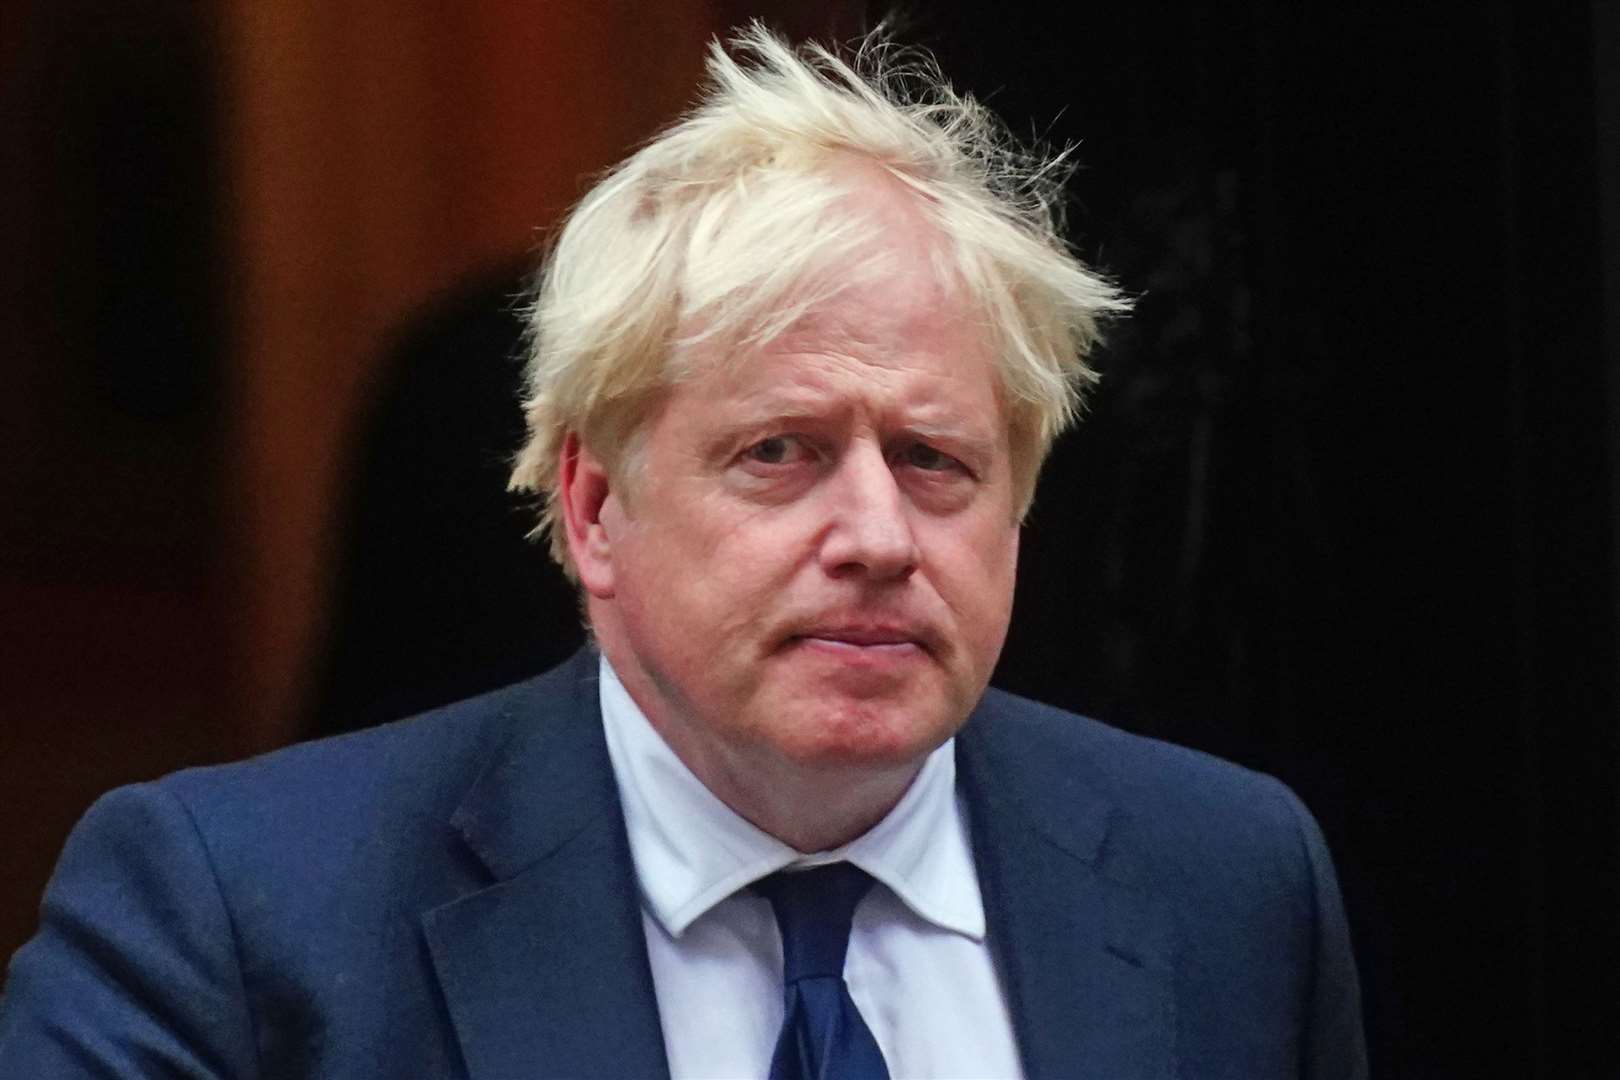 Boris Johnson is under fire over alleged parties held at Downing Street. Picture: Victoria Jones/PA